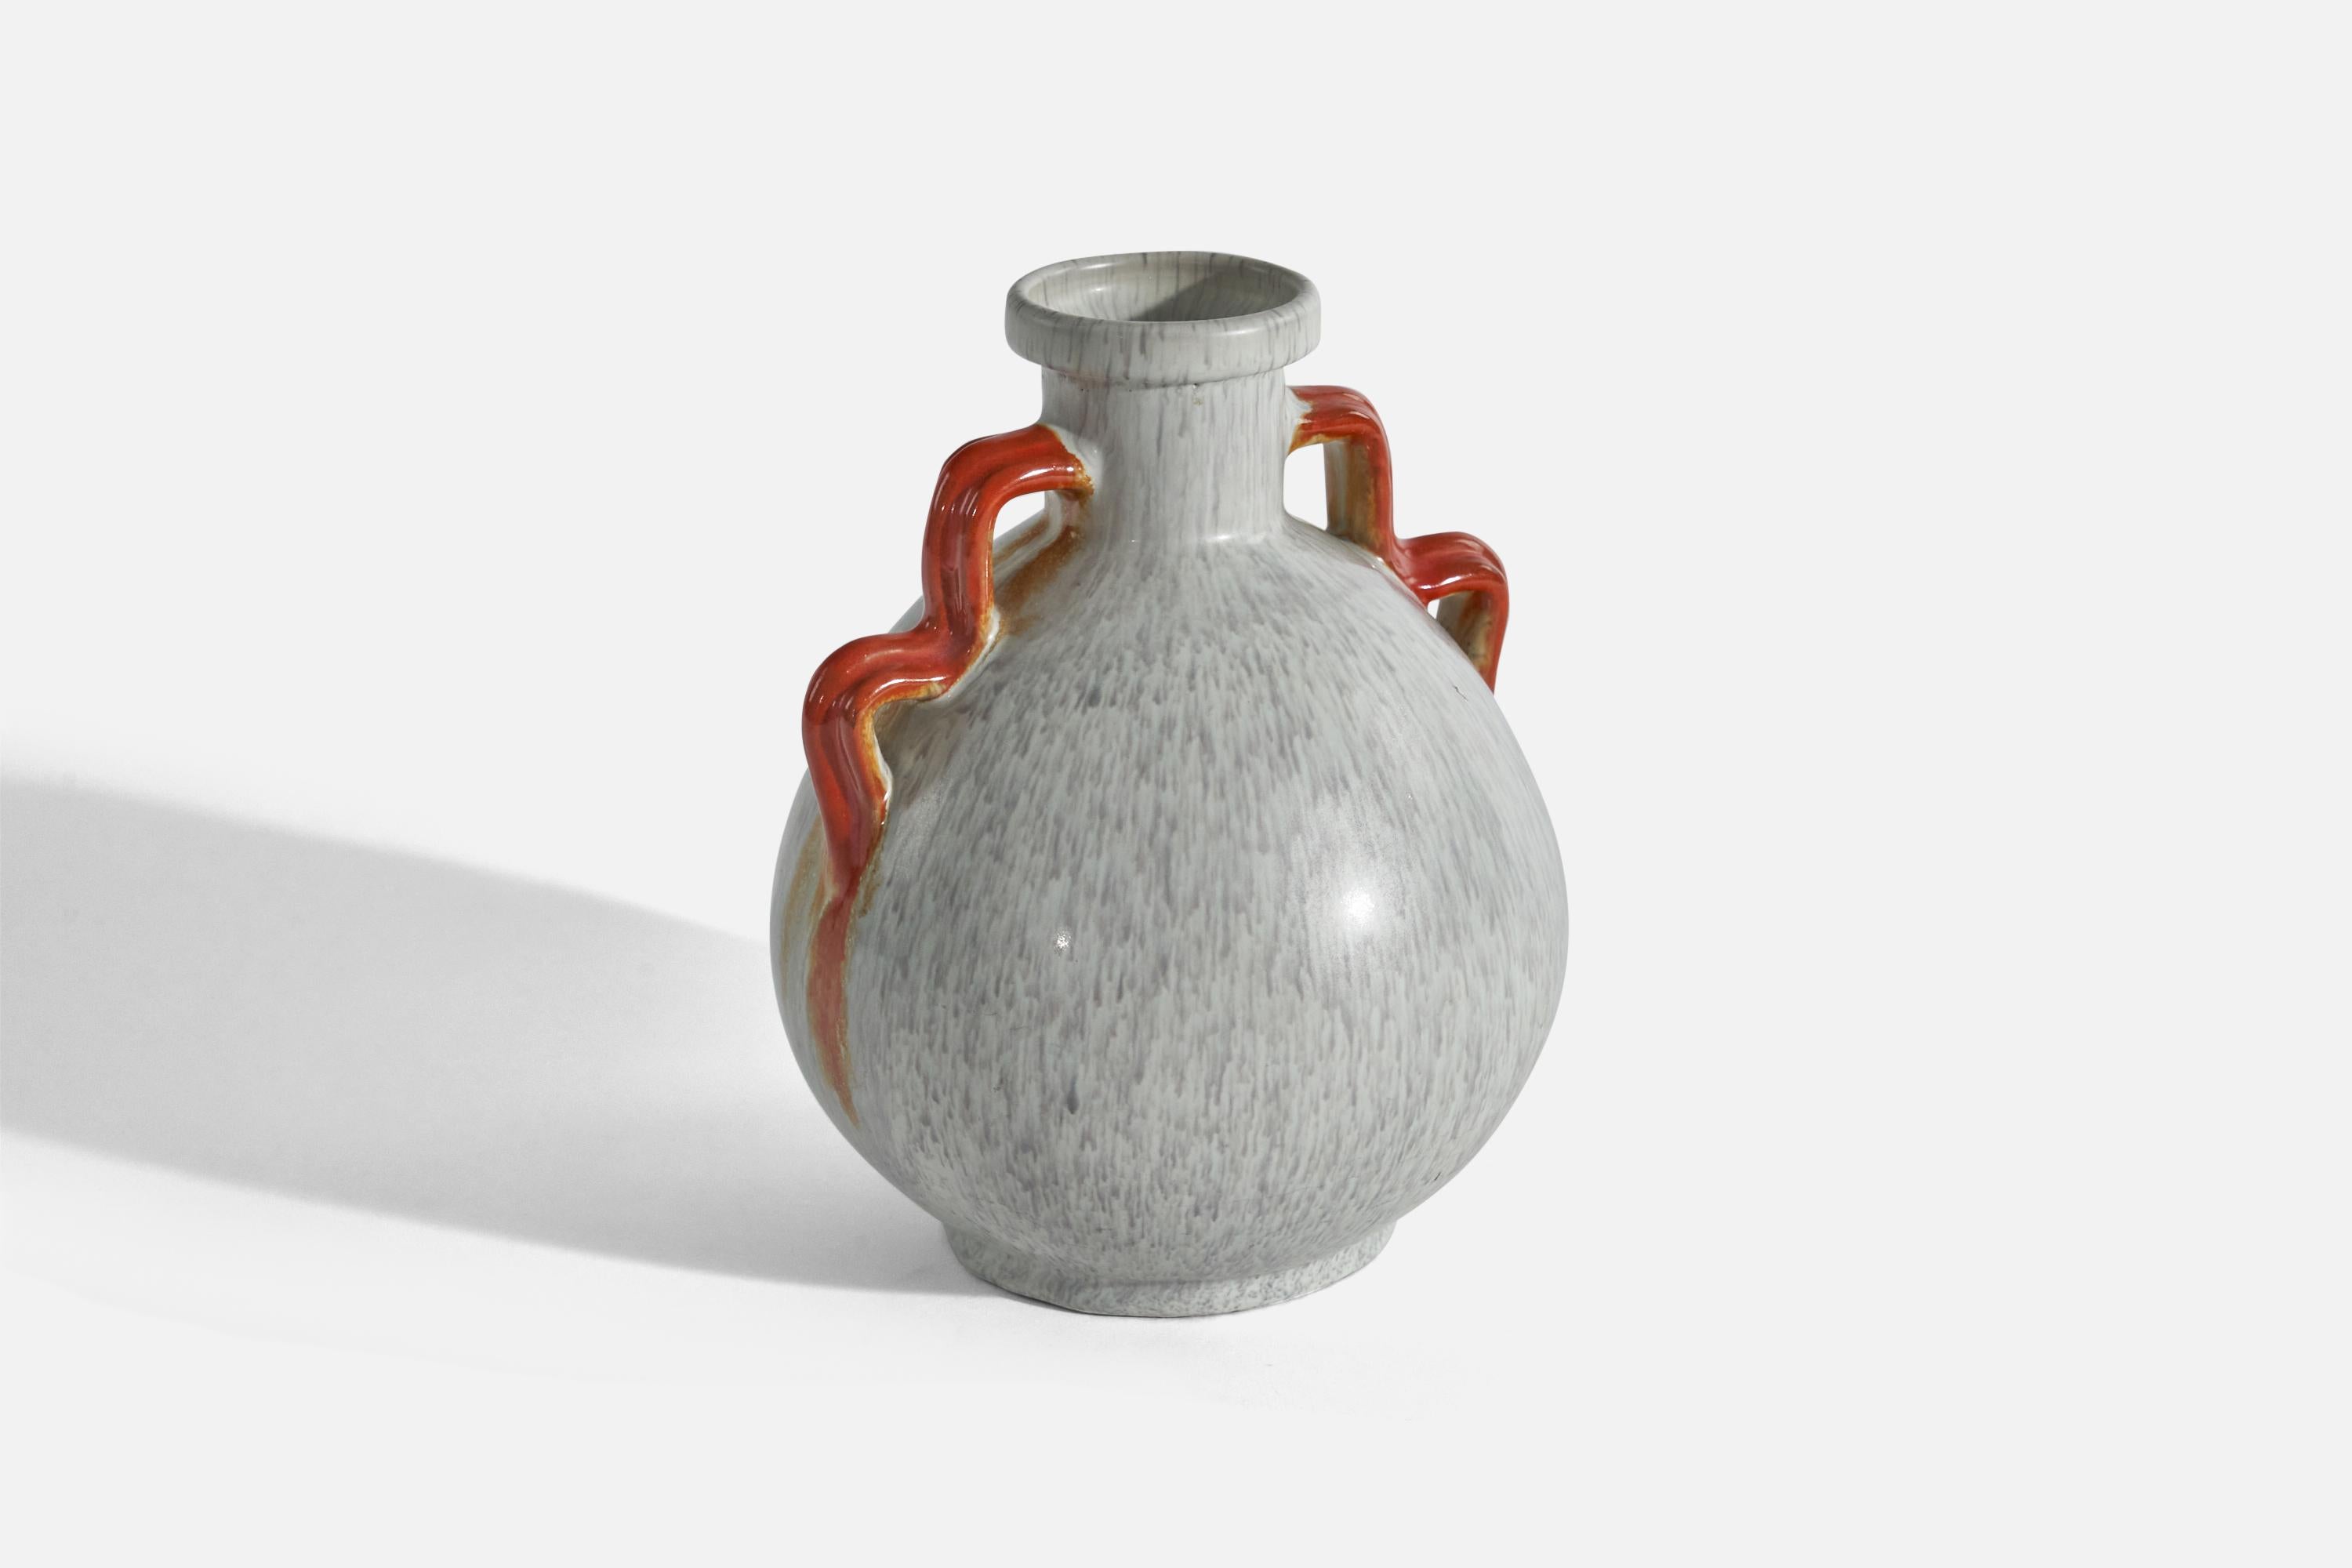 A gray and red, glazed earthenware vase designed and produced by Upsala-Ekeby, Sweden, 1940s.

